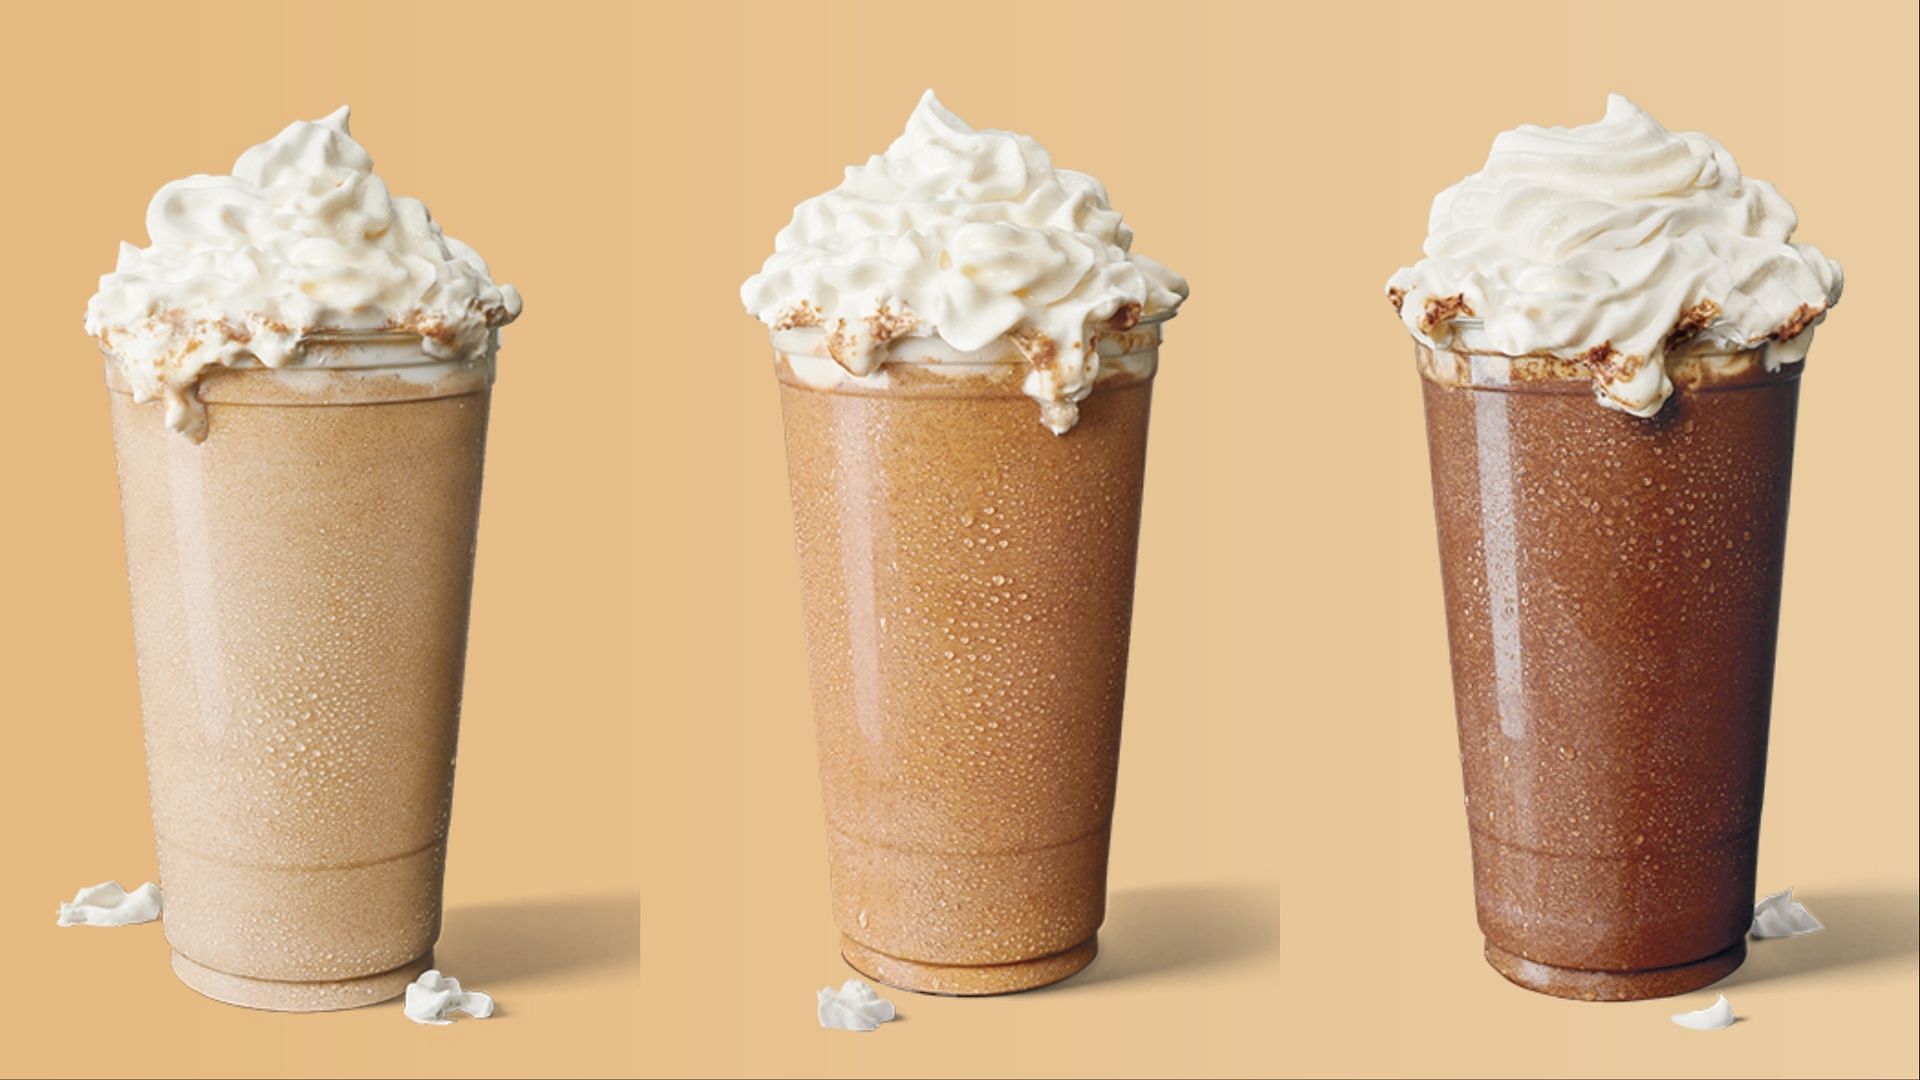 The new Iced Creamaccino Beverages can be enjoyed at participating locations starting August 3 (Image via Jack in the Box)